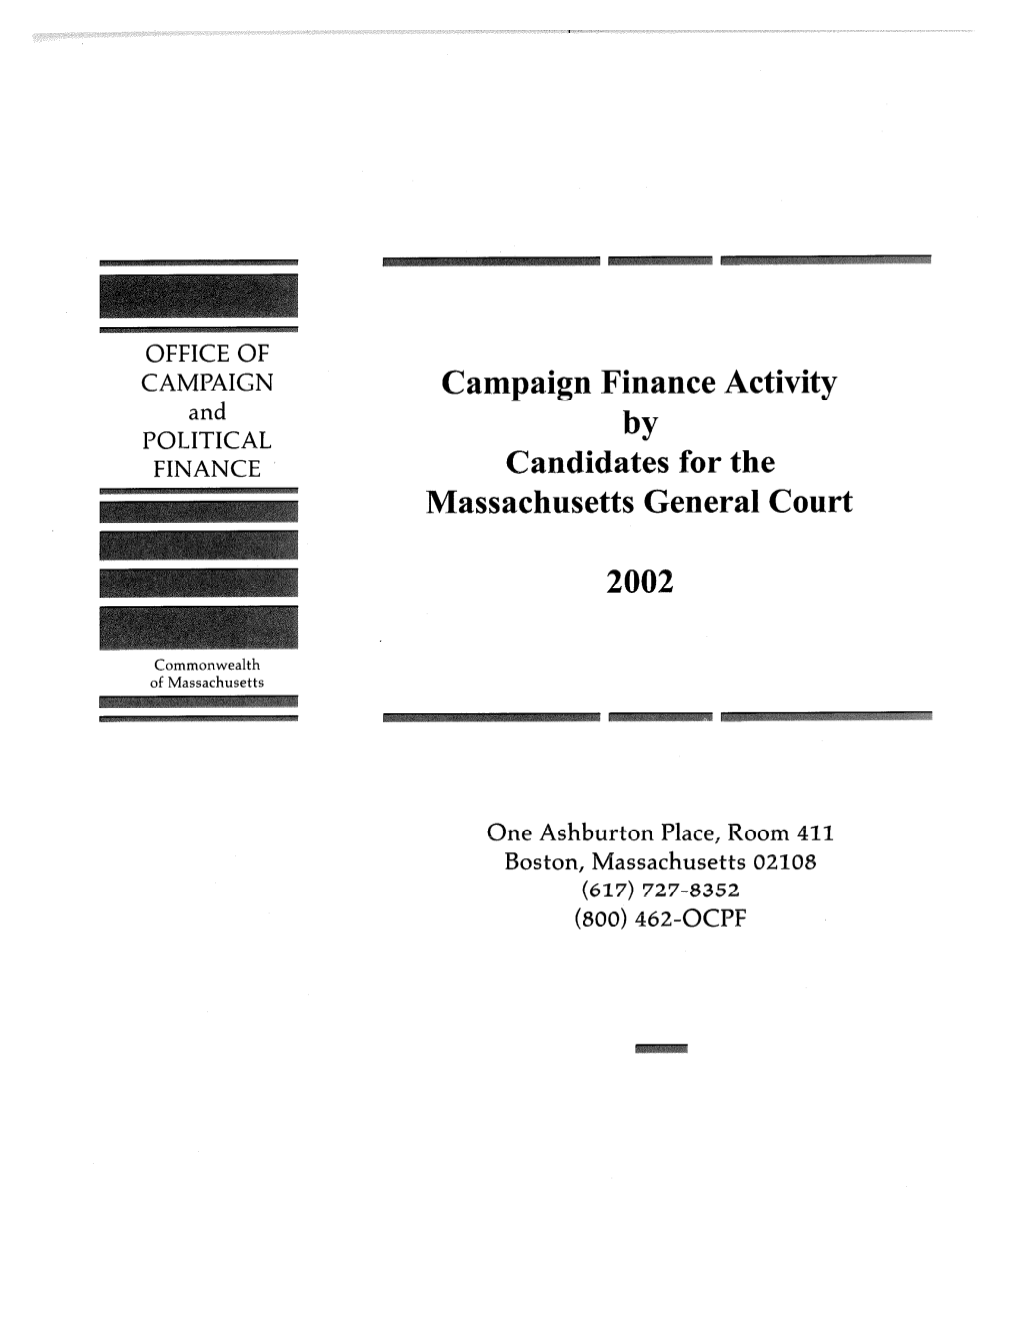 Campaign Finance Activity by Candidates for the Senate 2002